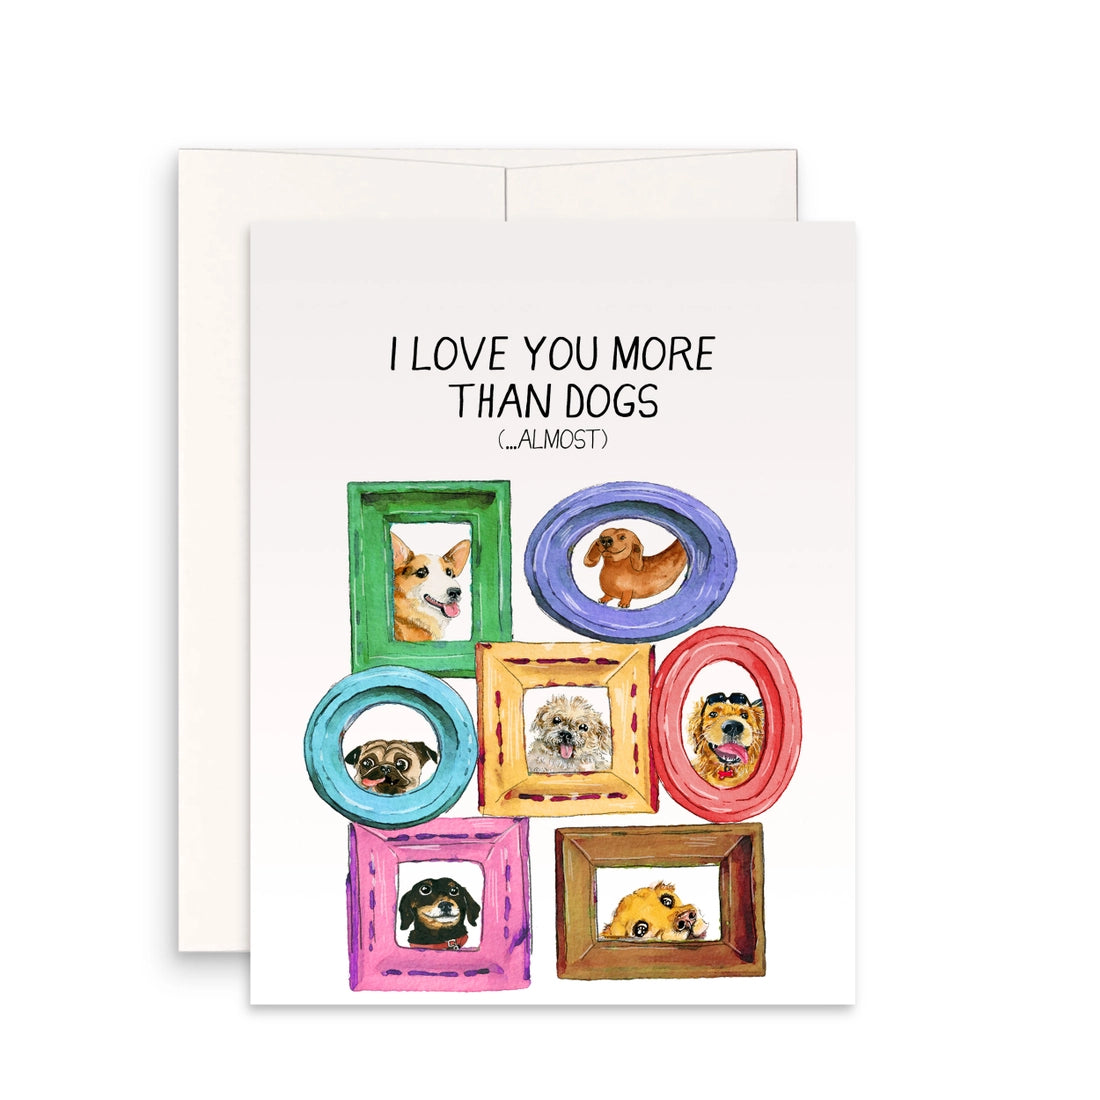 card that says "I love you more than dogs (almost)" with a drawing of 7 framed pictures of dogs